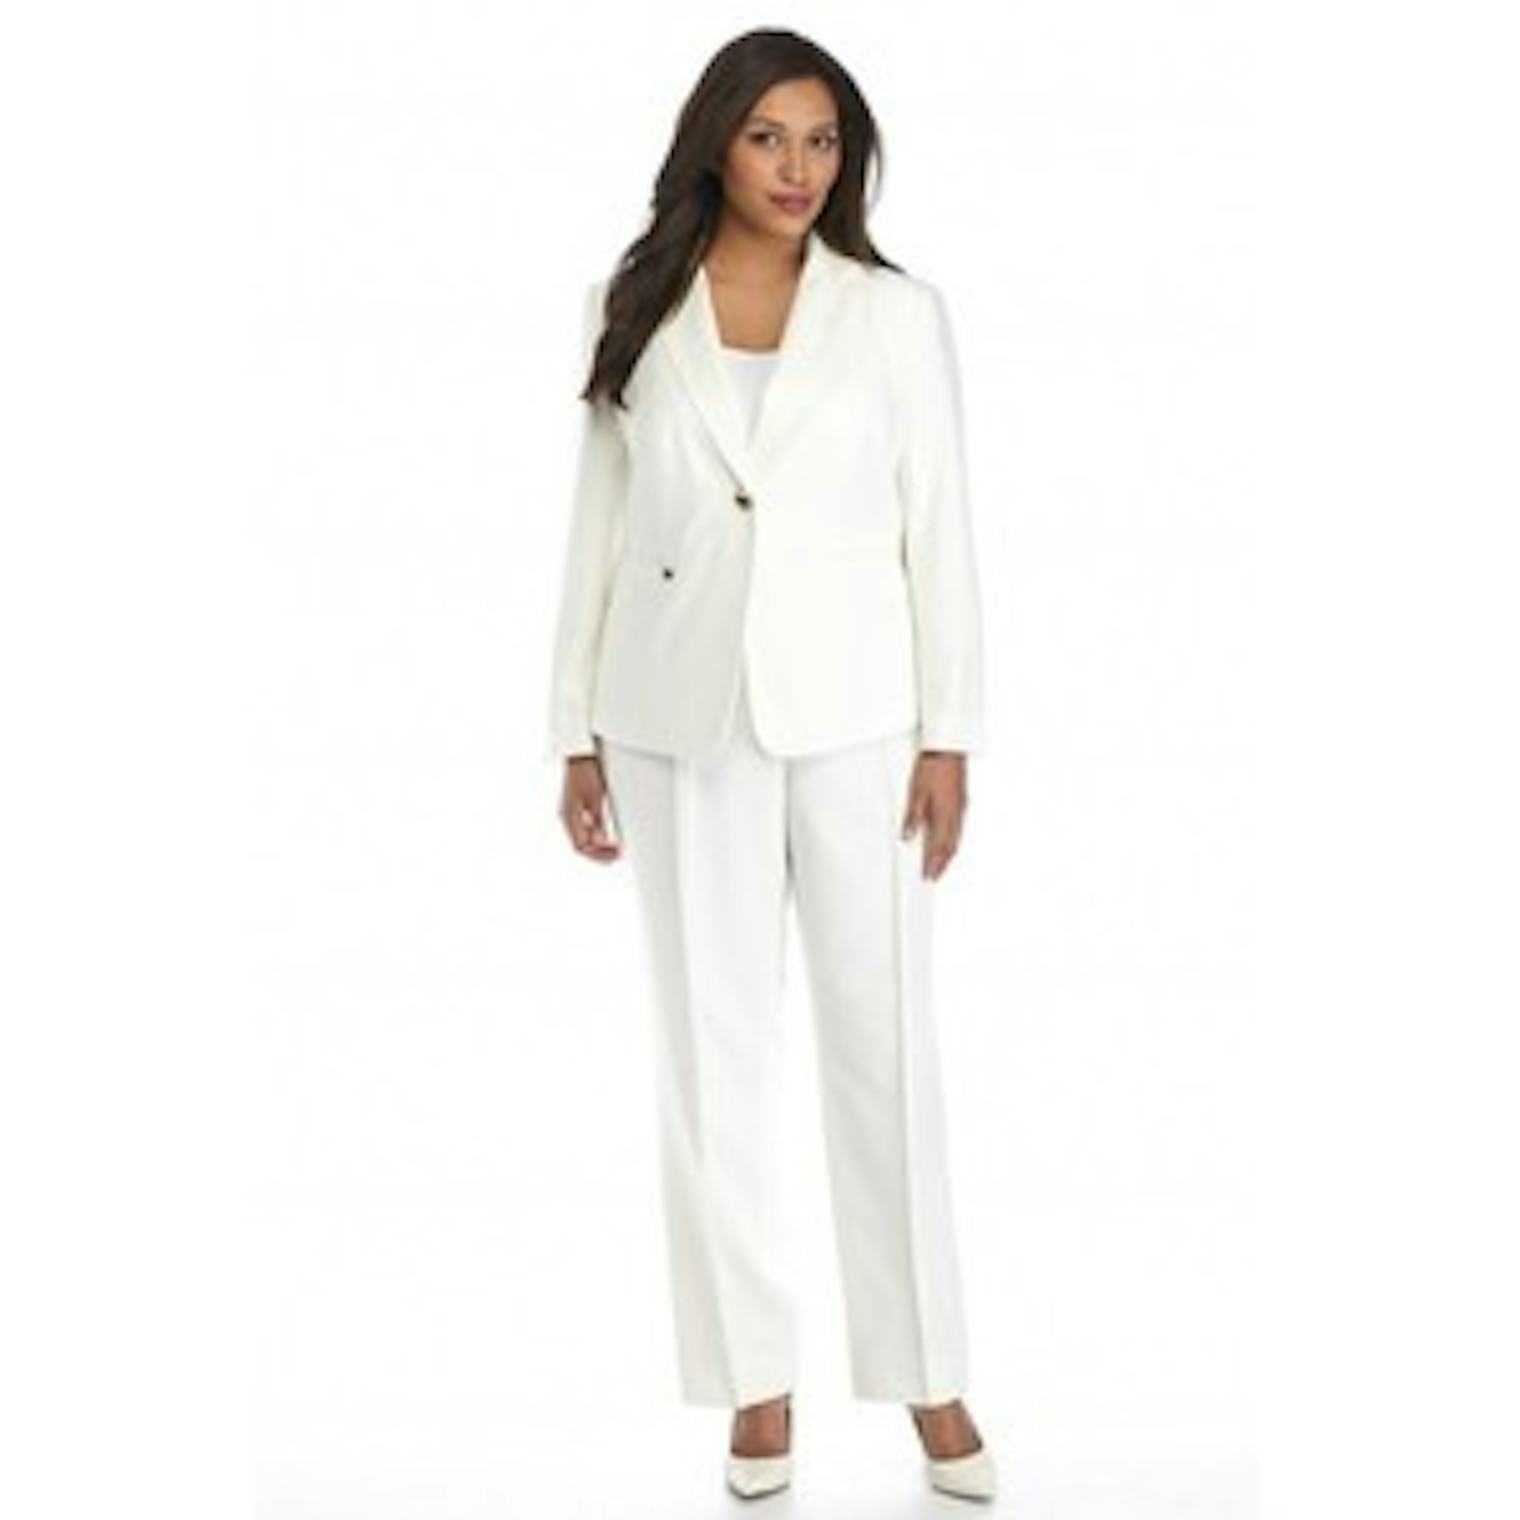 Where To Buy A White Pantsuit To Show That You’re With Her